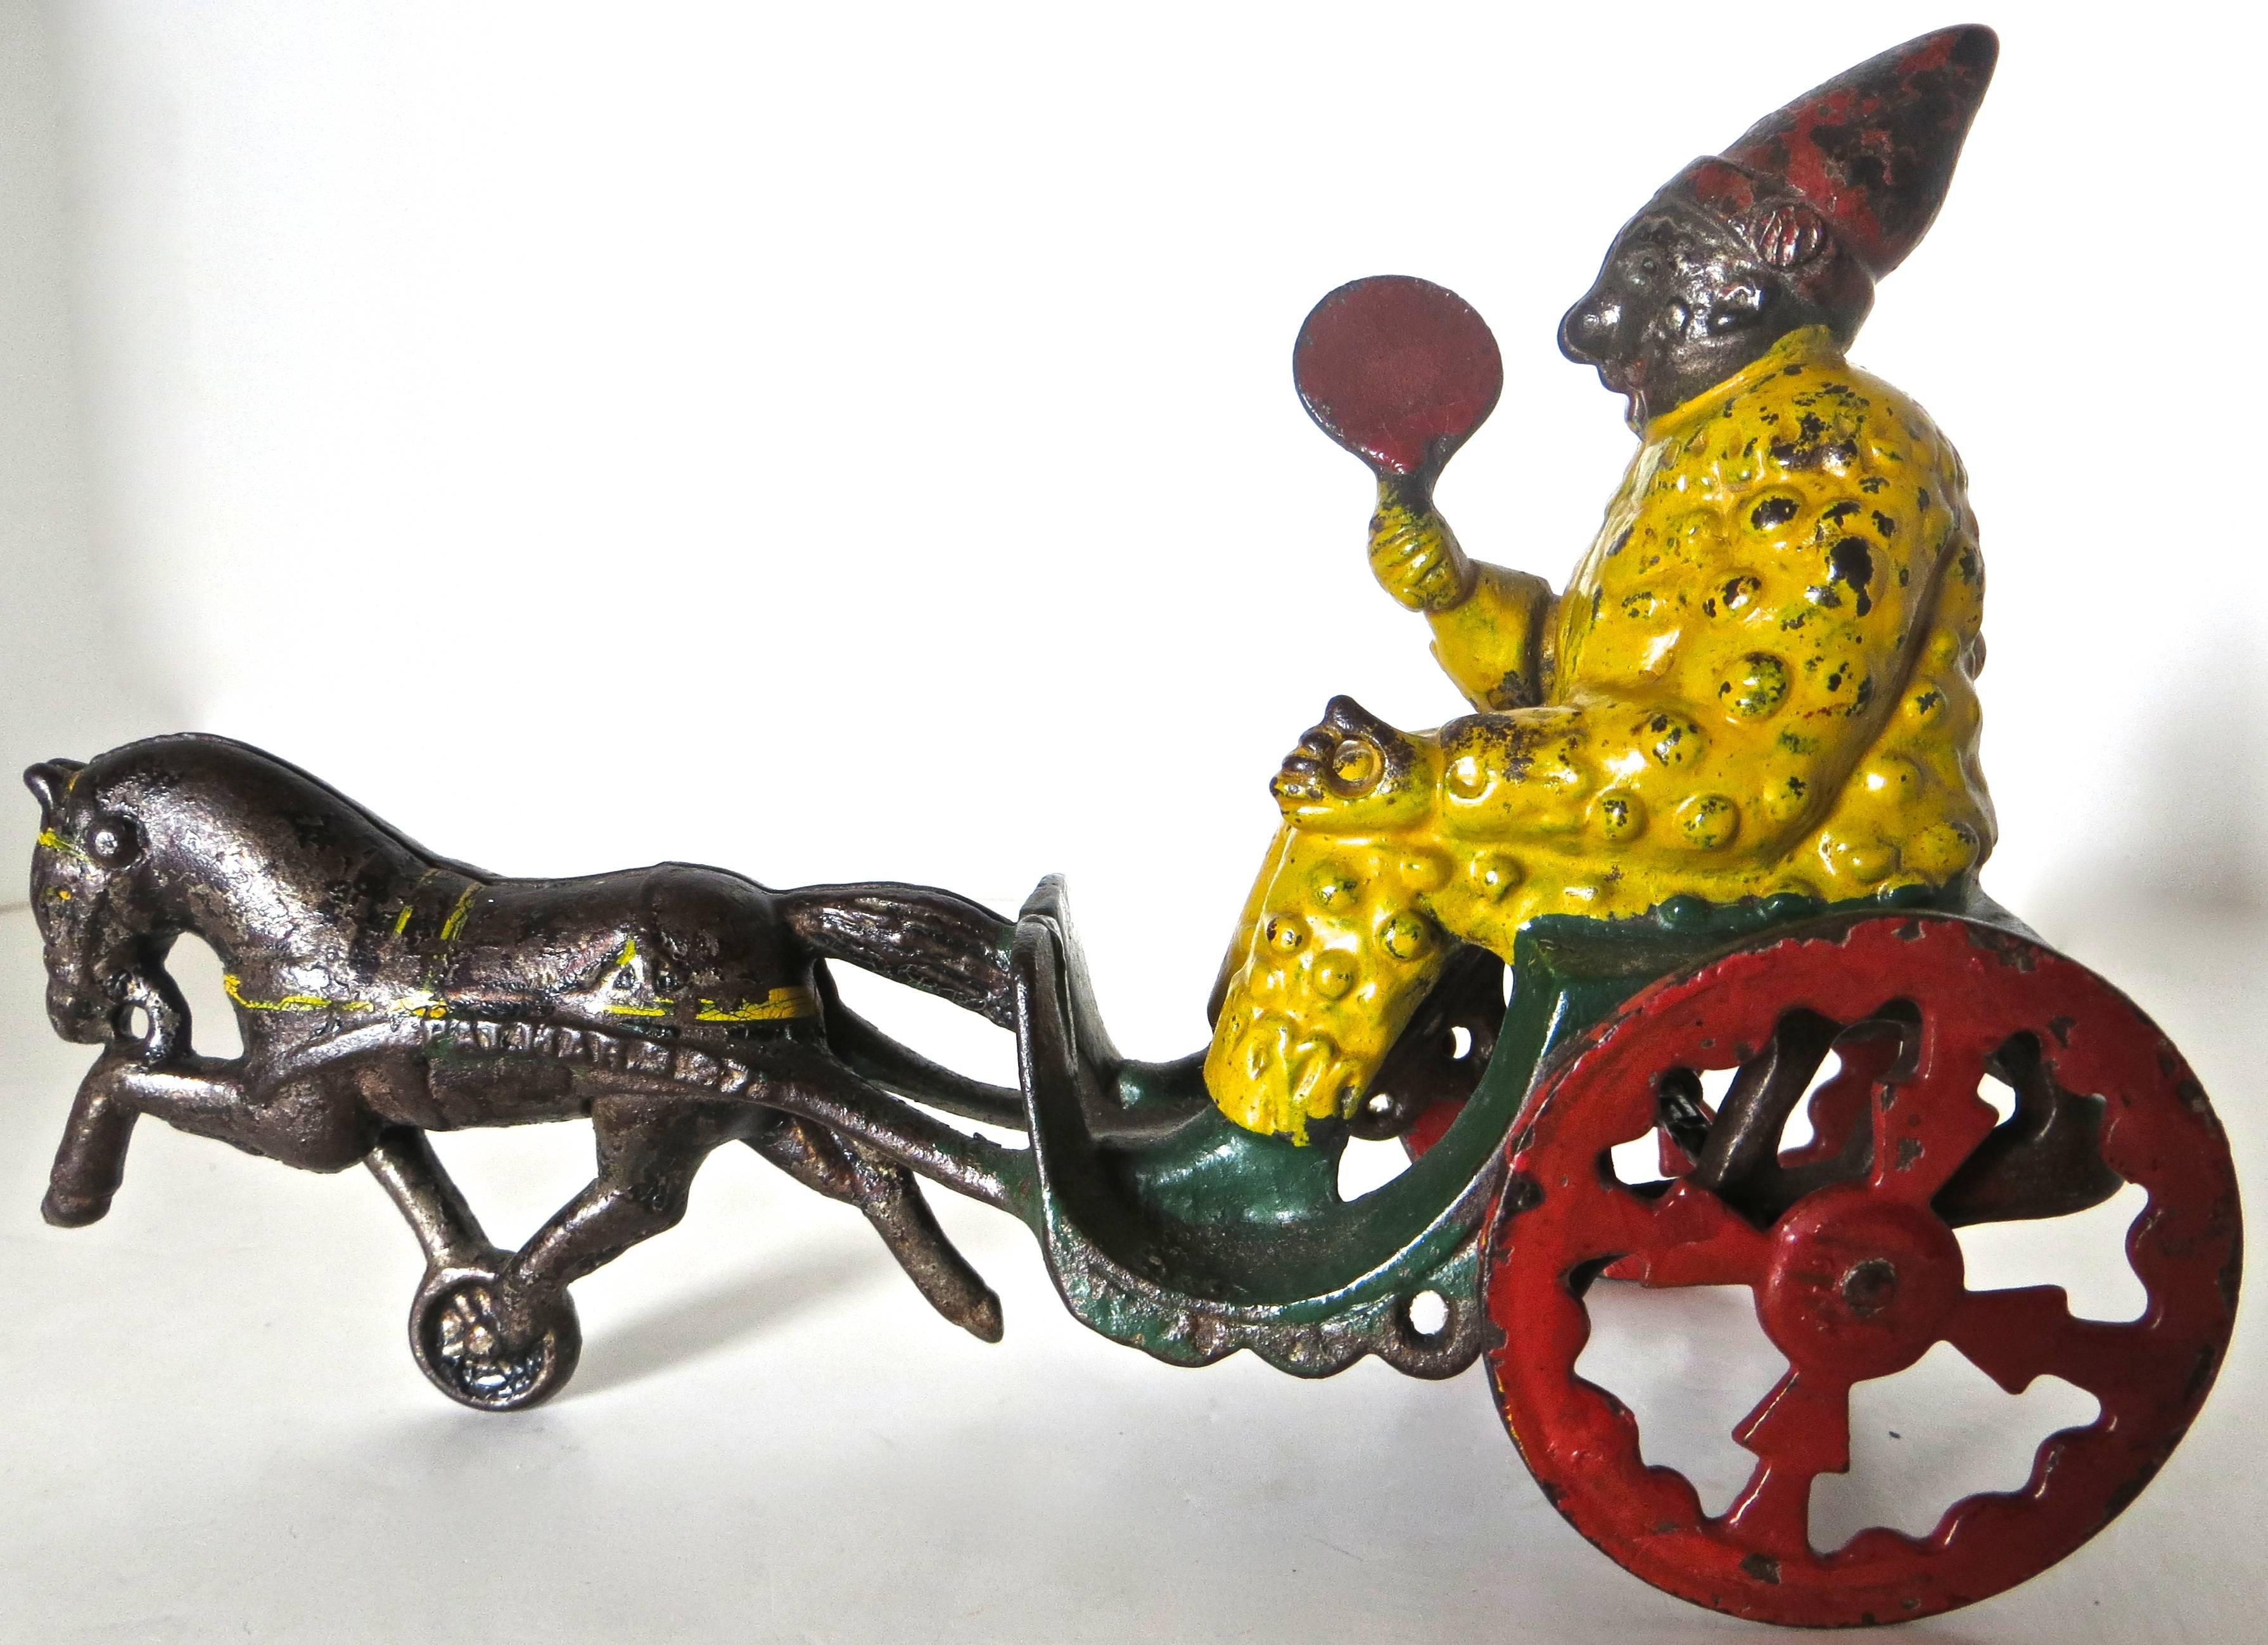 Whimsical cast iron horse drawn articulated toy that depicts a clown who, when rolled across a flat surface, fans himself by waving his right arm back and forth. It was manufactured by the 